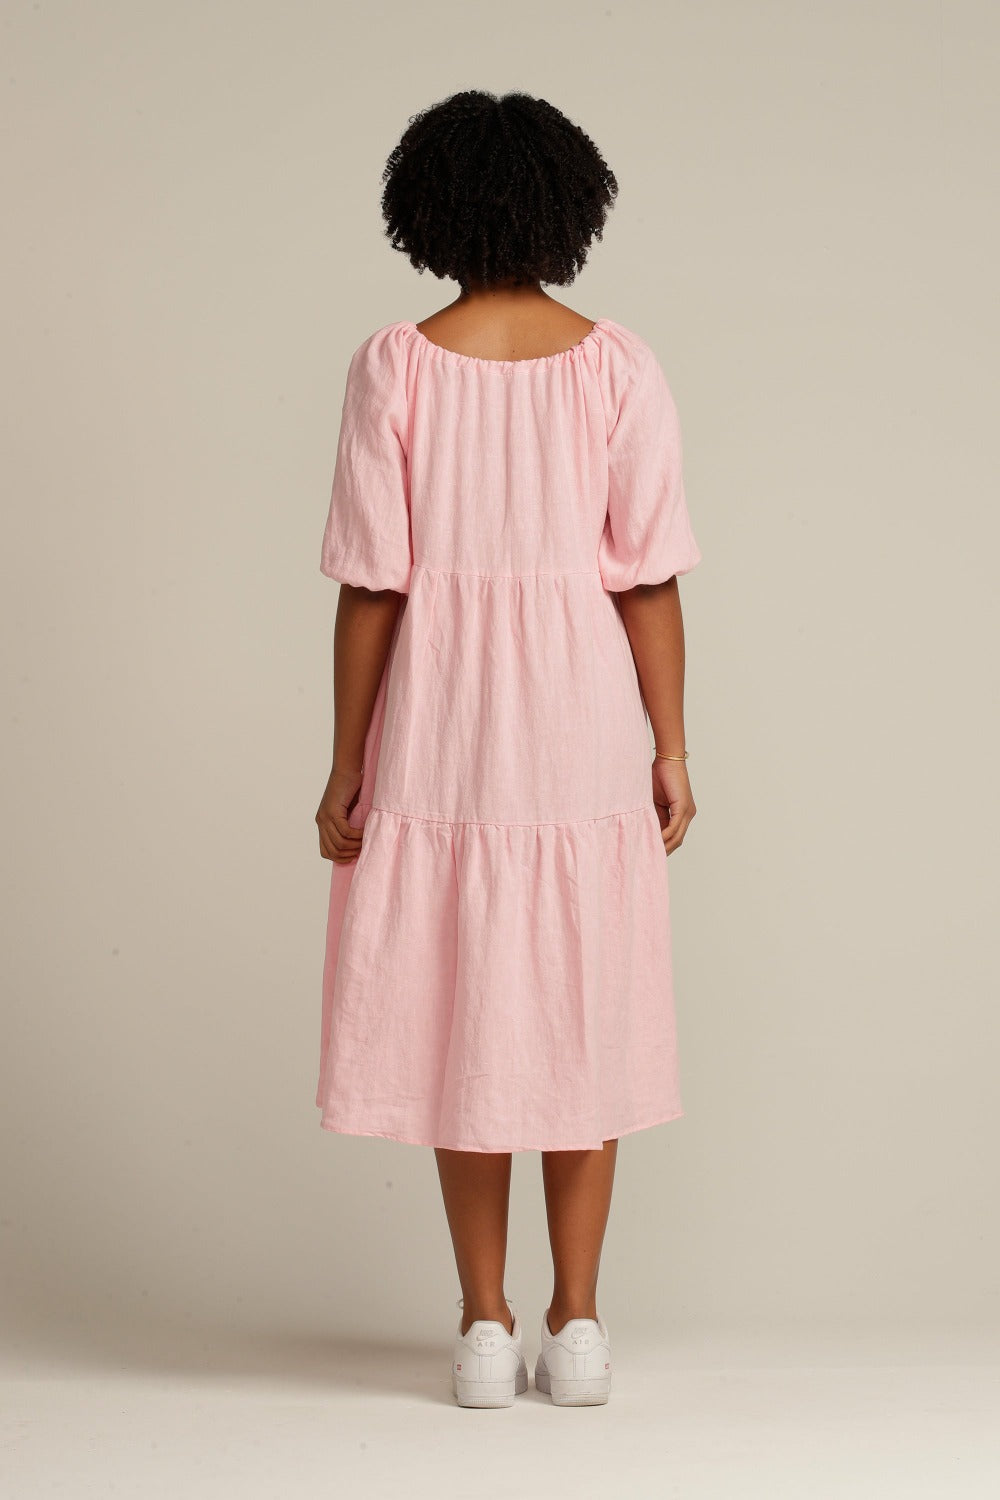 woman with black curly hair facing her back to camera is wearing a pink linen dress that is below knee length